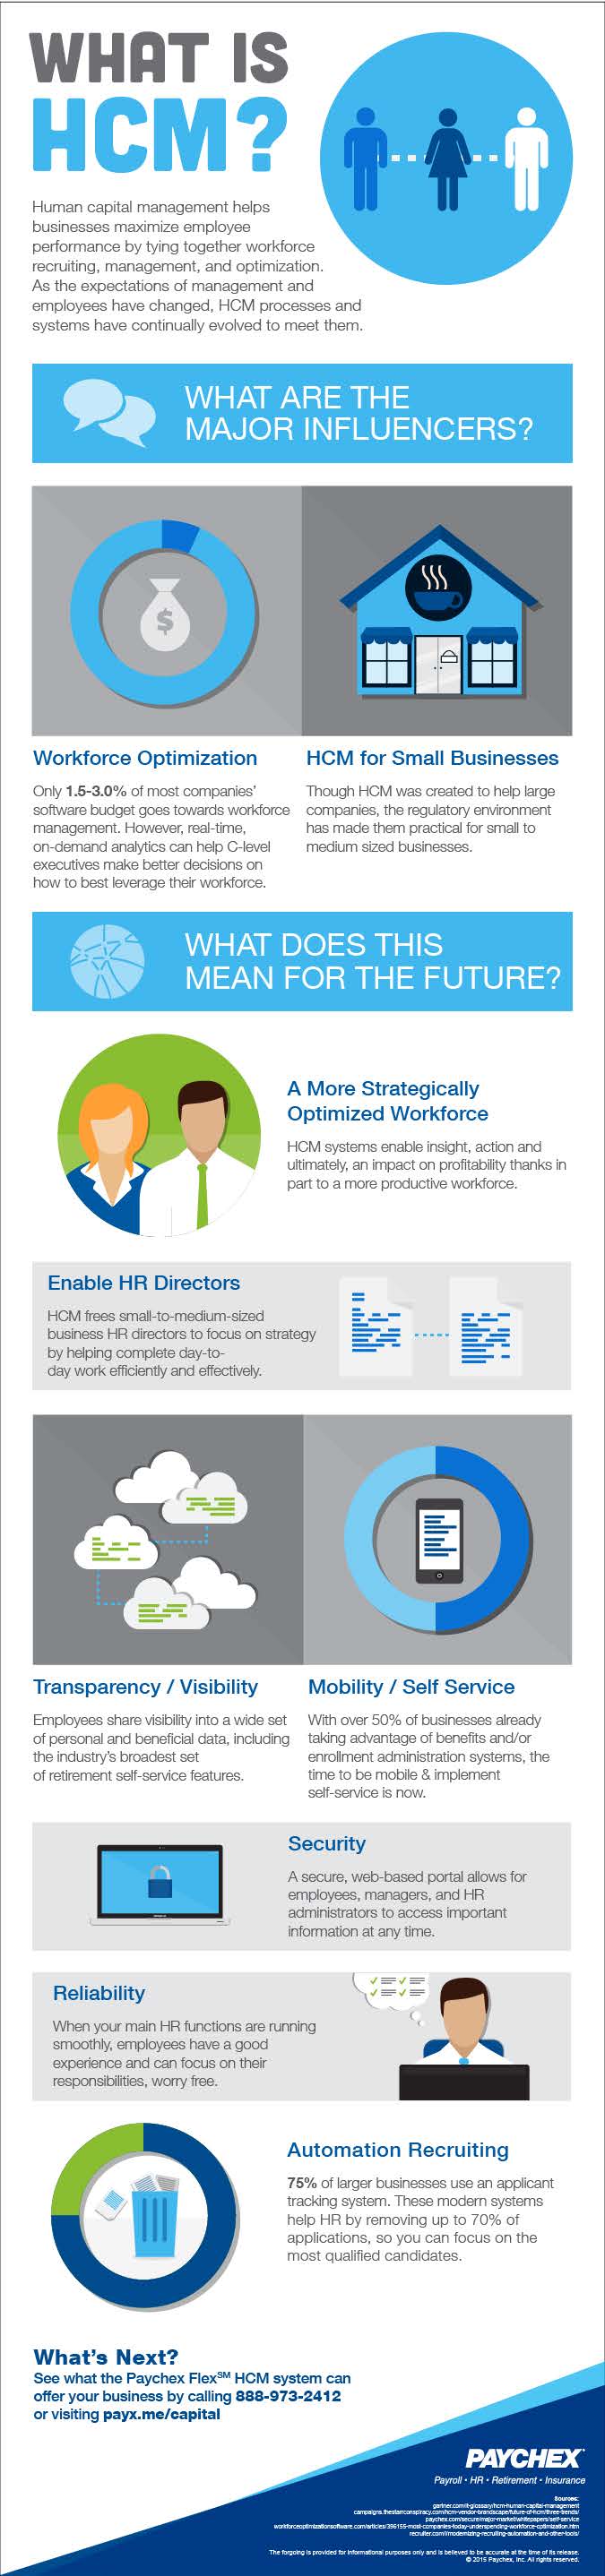 an infographic about what is HCM (human capital management)